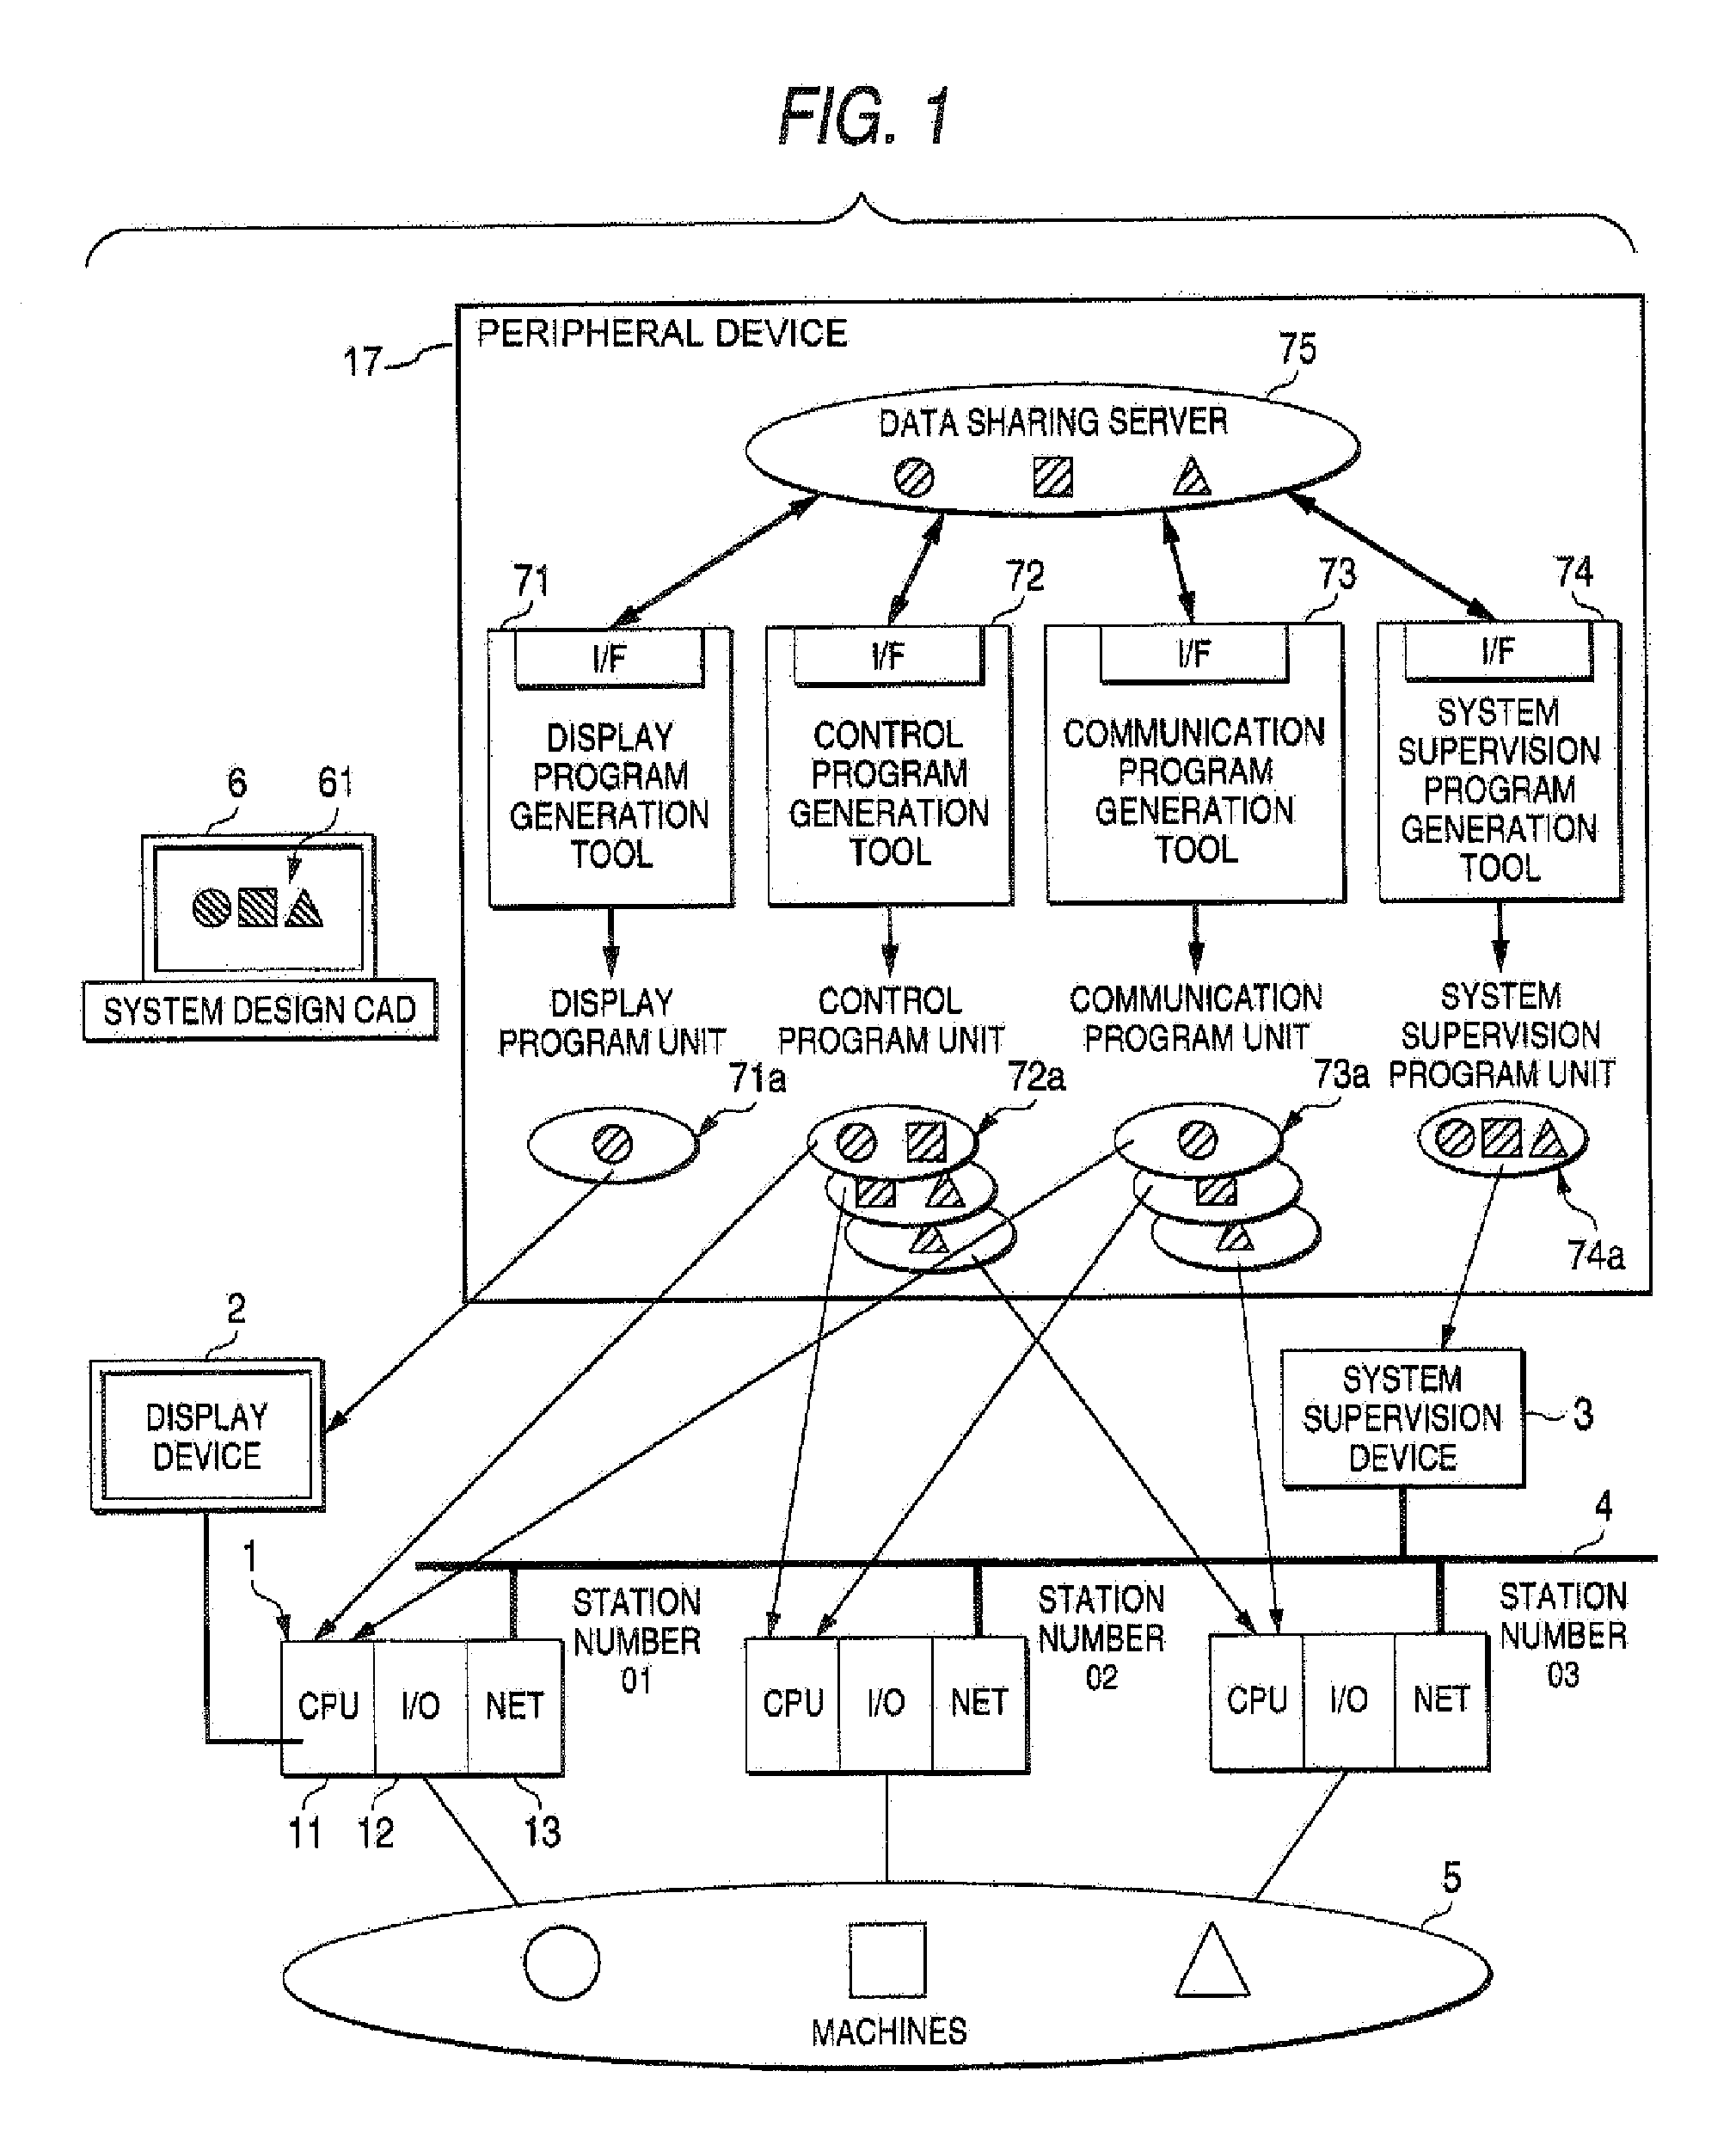 Method for programming a multiple device control system using object sharing